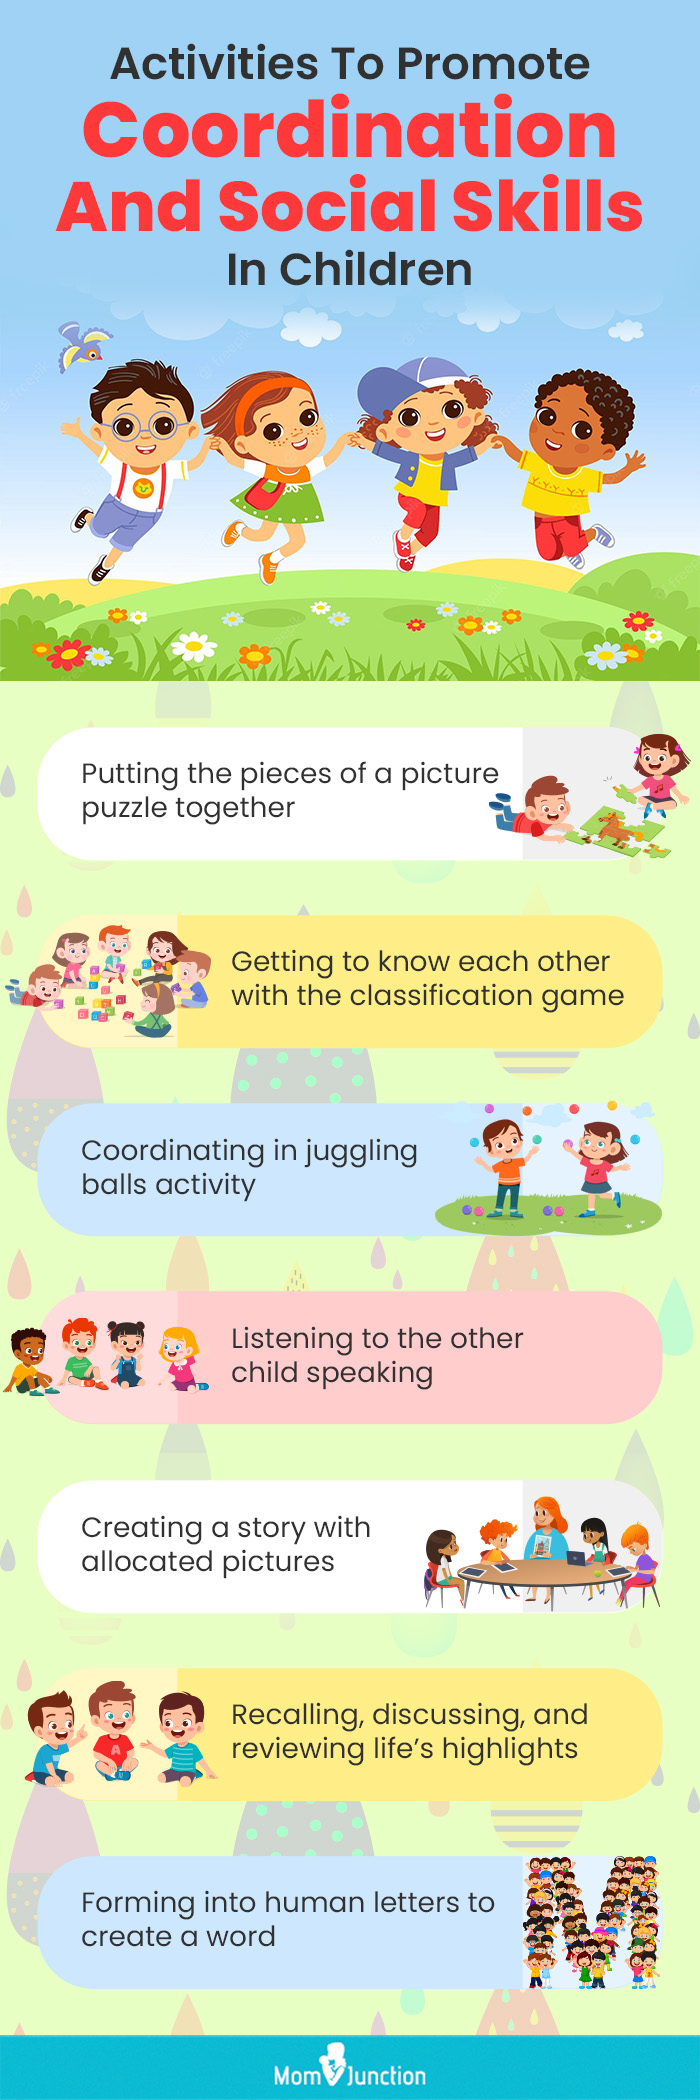 activities to promote coordination and social skills in children (infographic)